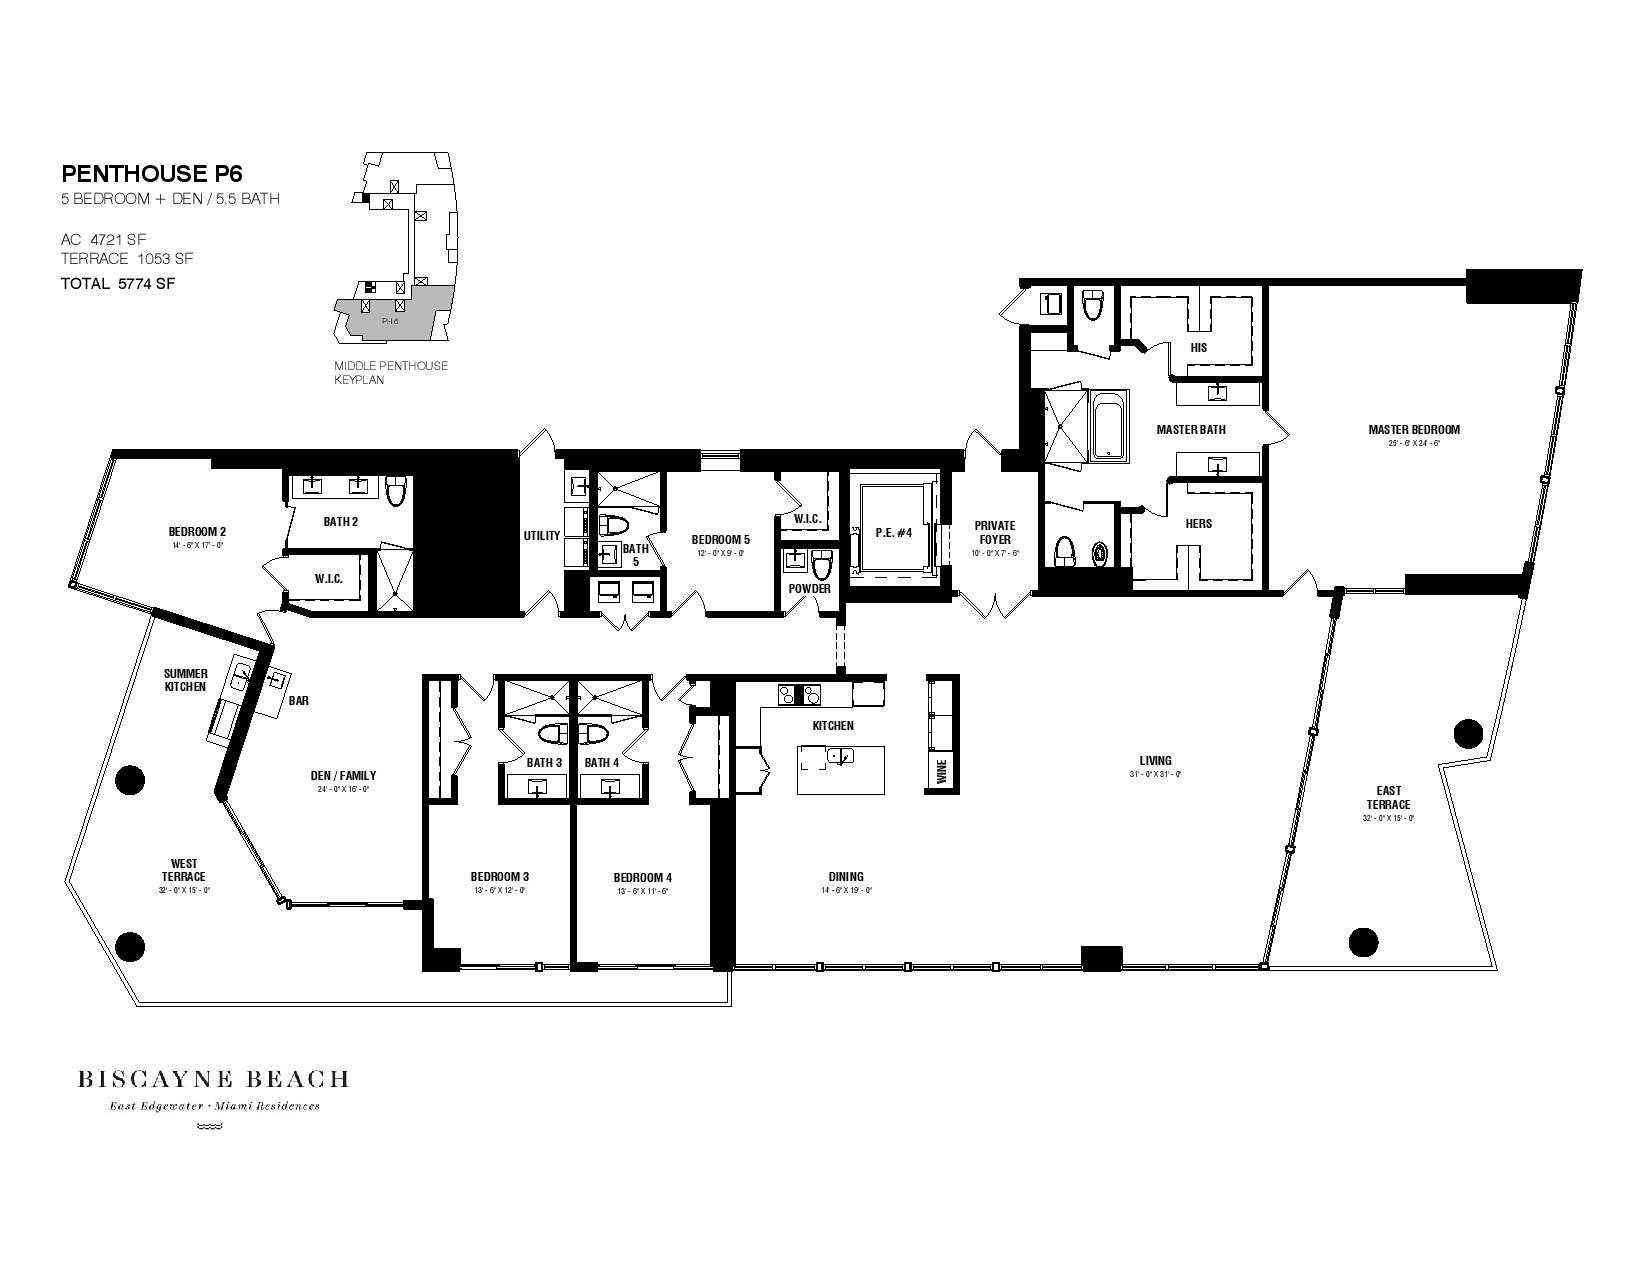 Biscayne Beach Penthouse Residence P6